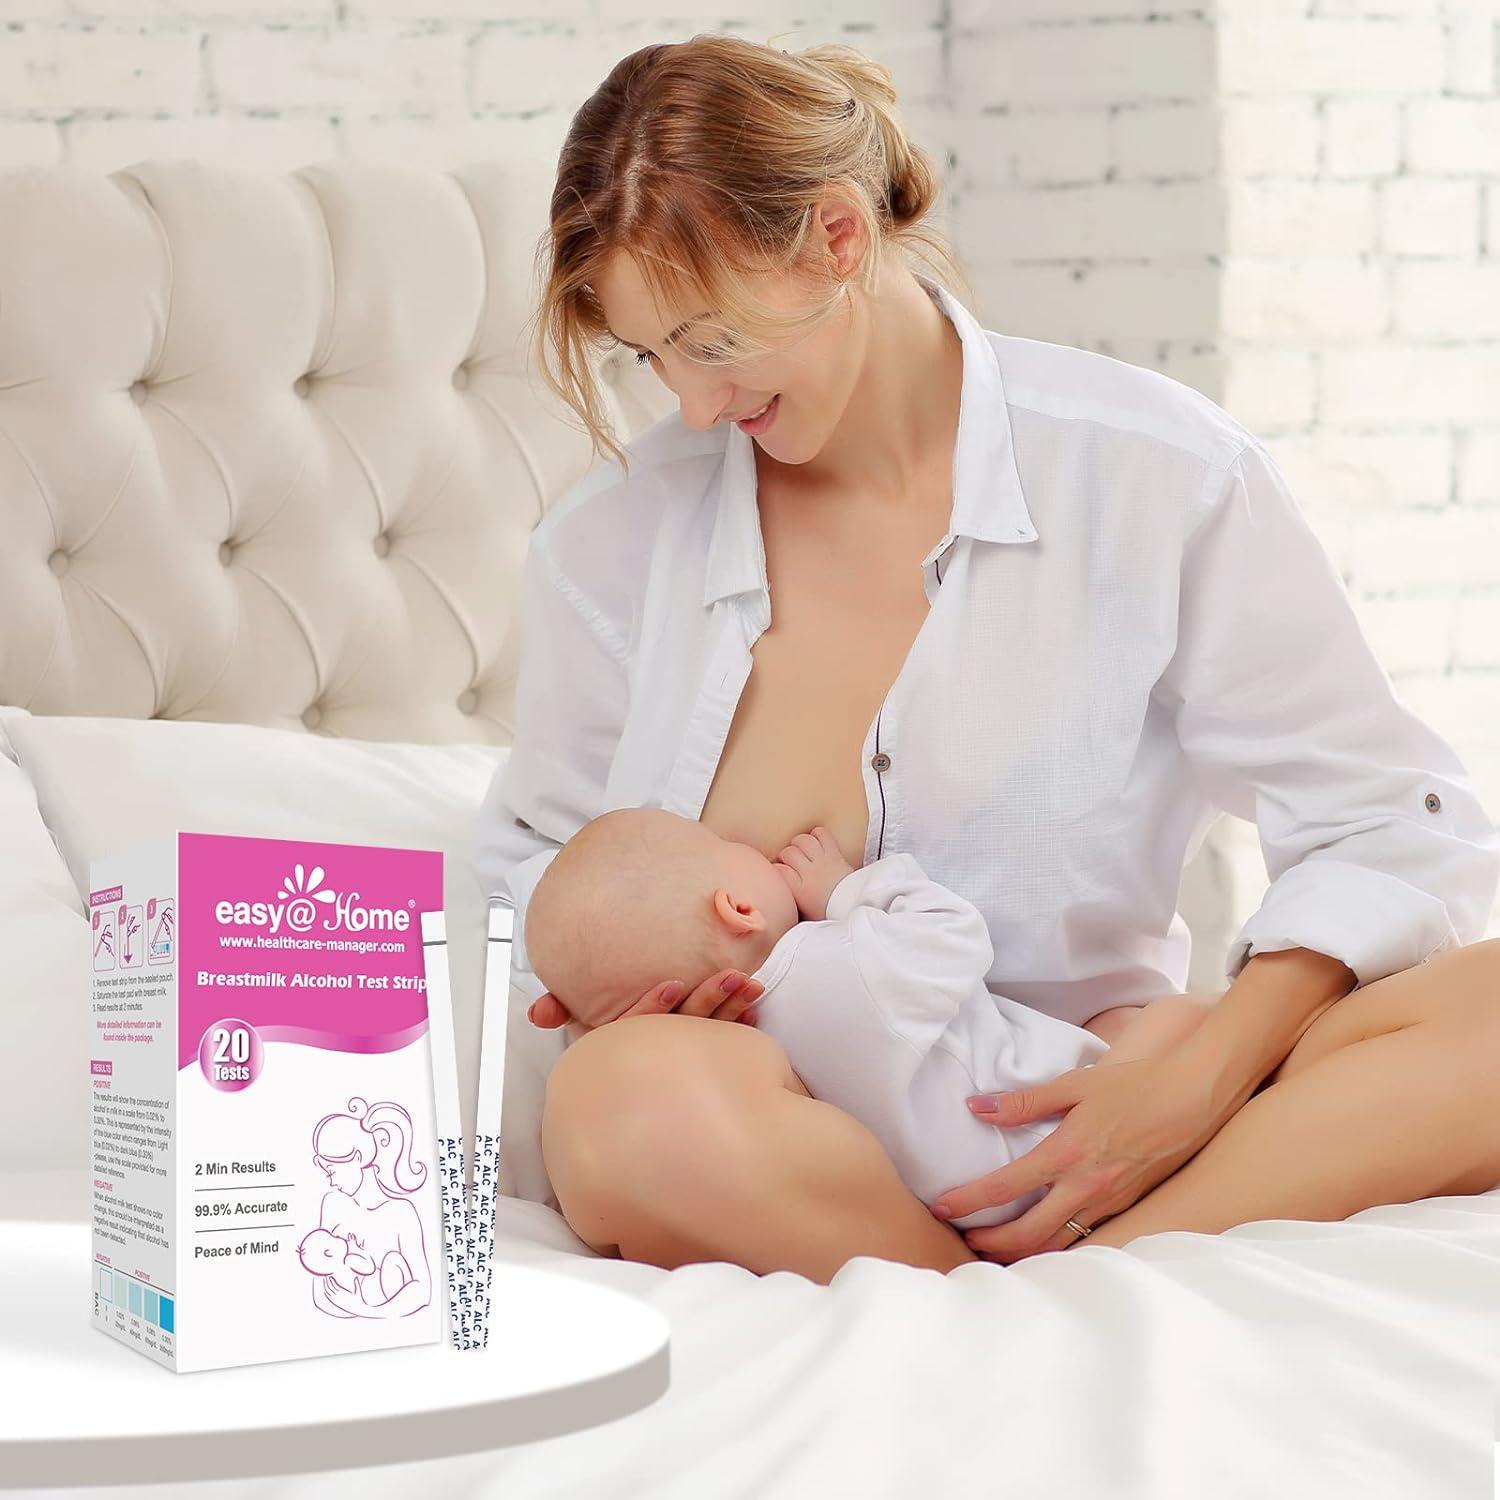 Easy Home Breastmilk Alcohol Test Strips at Home Alcohol Test for  Breastfeeding and Lactation Milk Testing Give Nursing Mothers Clarity Easy  Quick and Precise Detection EBA-20T 20-Pack